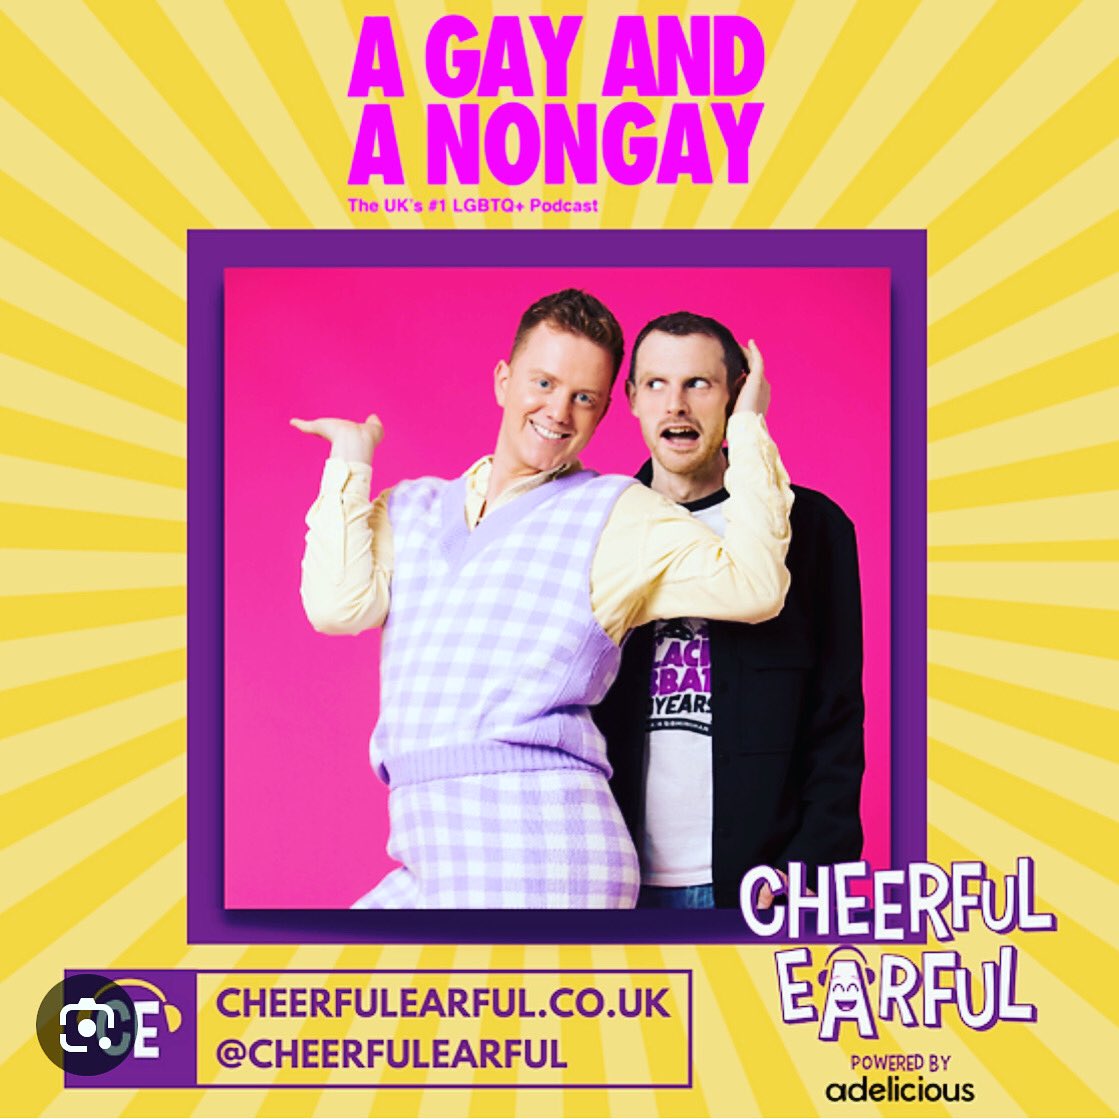 Have you got your ticket yet for our next live show on November 2nd? @CheerfulPodFest Can’t wait for this one. gaynongay.com for tickets! 🎟️🏳️‍🌈